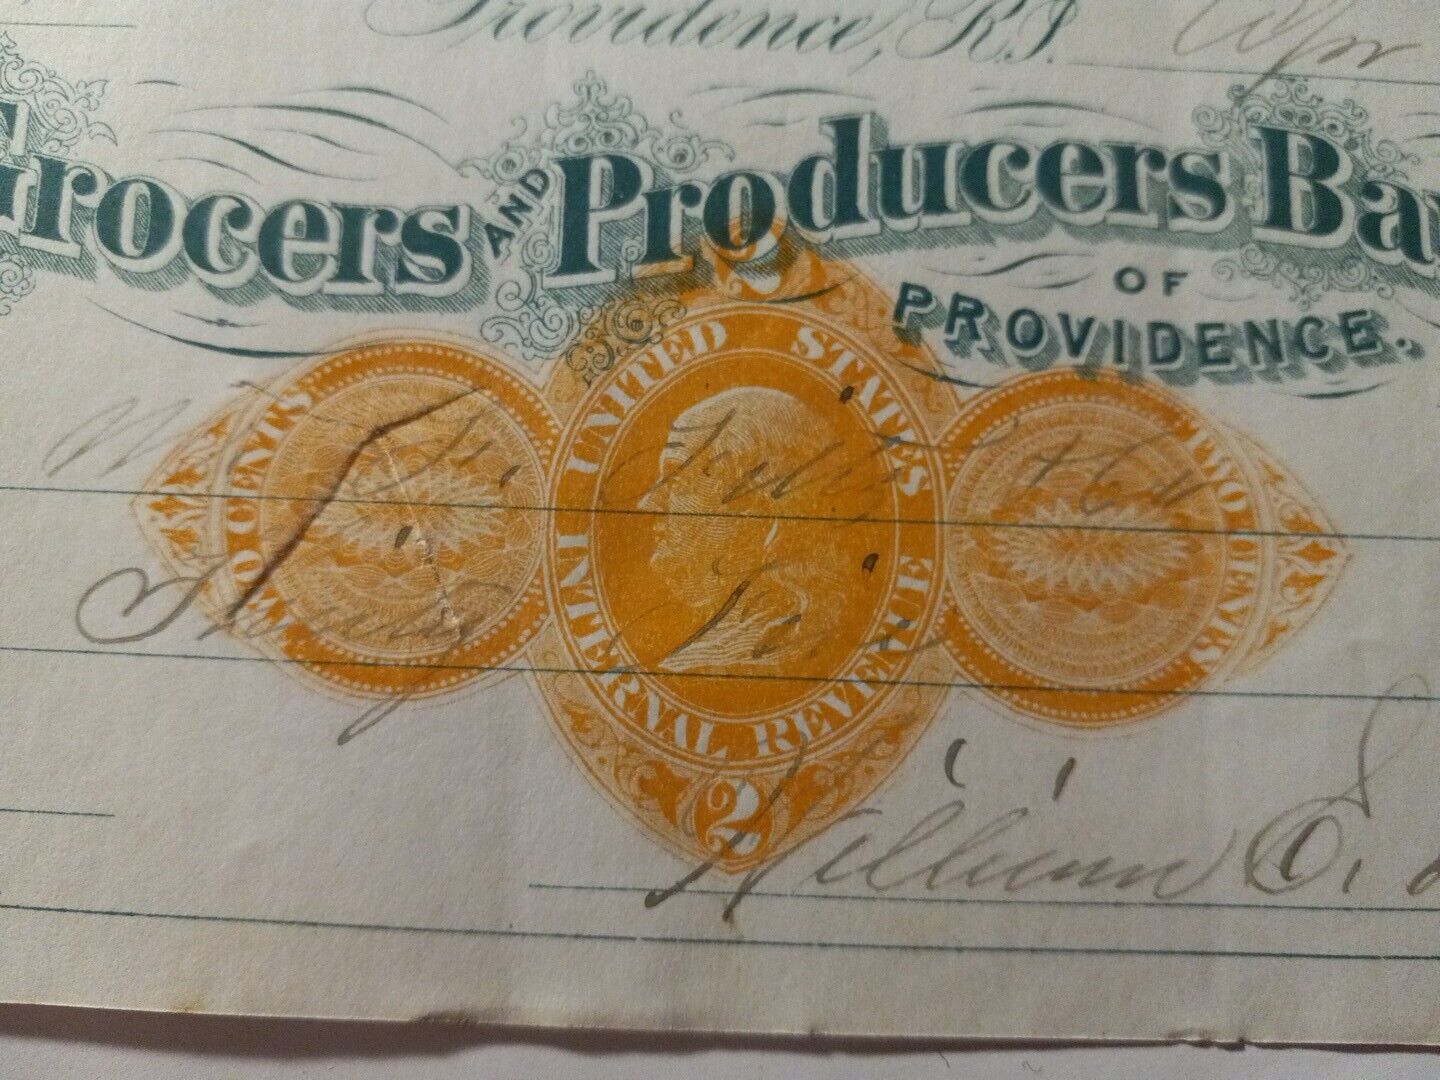 GROCERS AND PRODUCERS BANK OF PROVIDENCE RI 1874CHECK Beautiful 